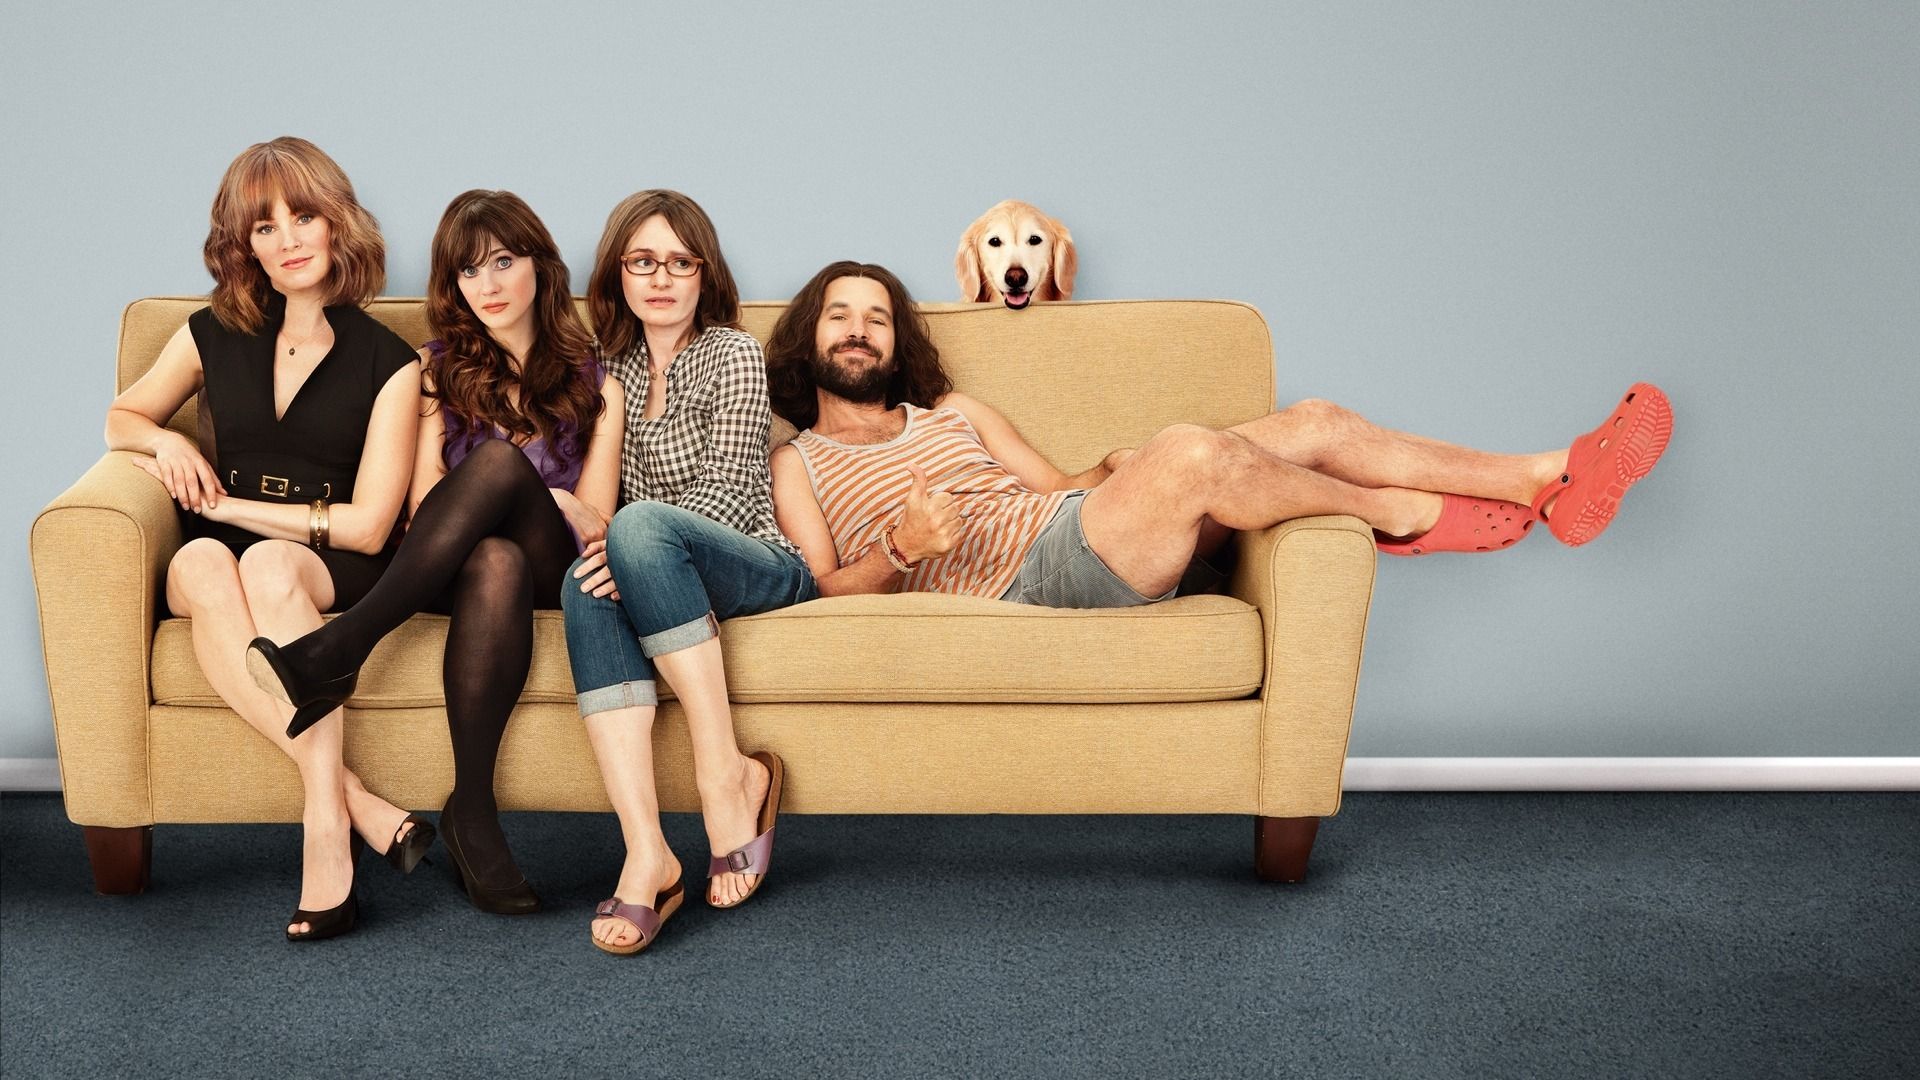 Our Idiot Brother background